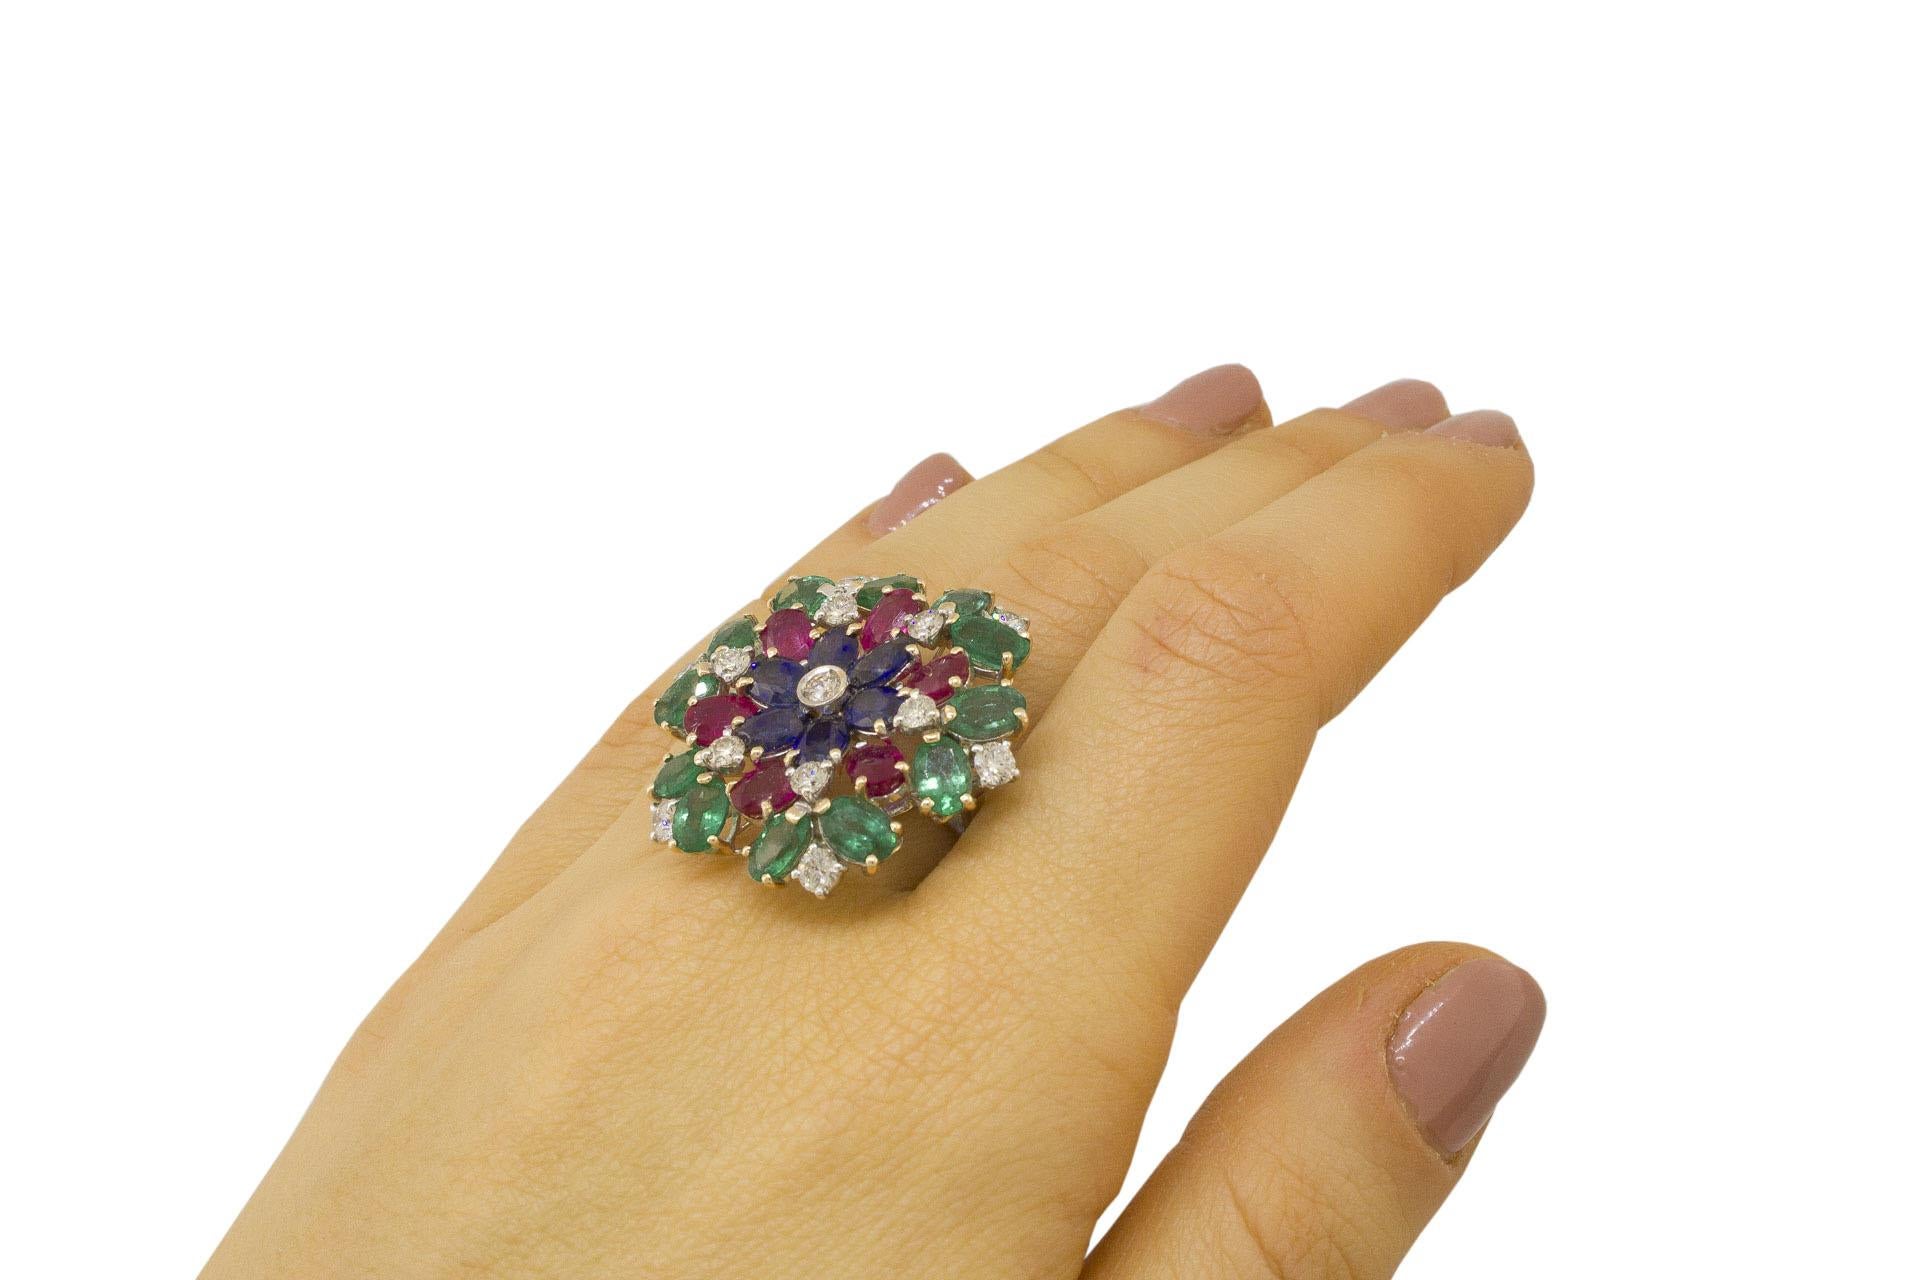 White Diamonds Rubies Emeralds Blue Sapphires White and Yellow Gold Flower Ring For Sale 2